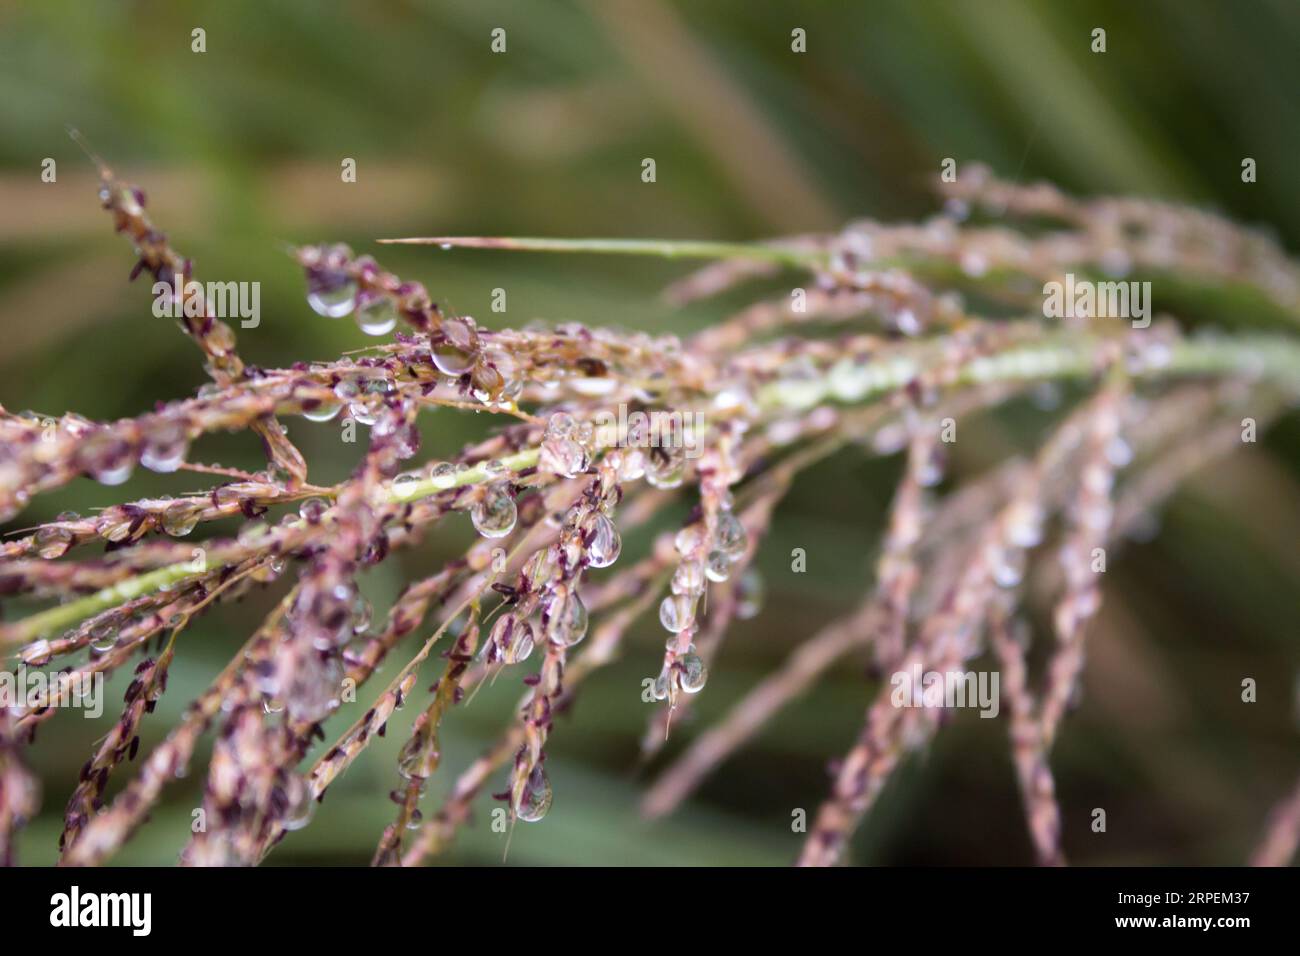 Close-up view of water droplets in between the seeds and flowers of grass in the Afromontane Drakensberg mountains in South Africa. Stock Photo